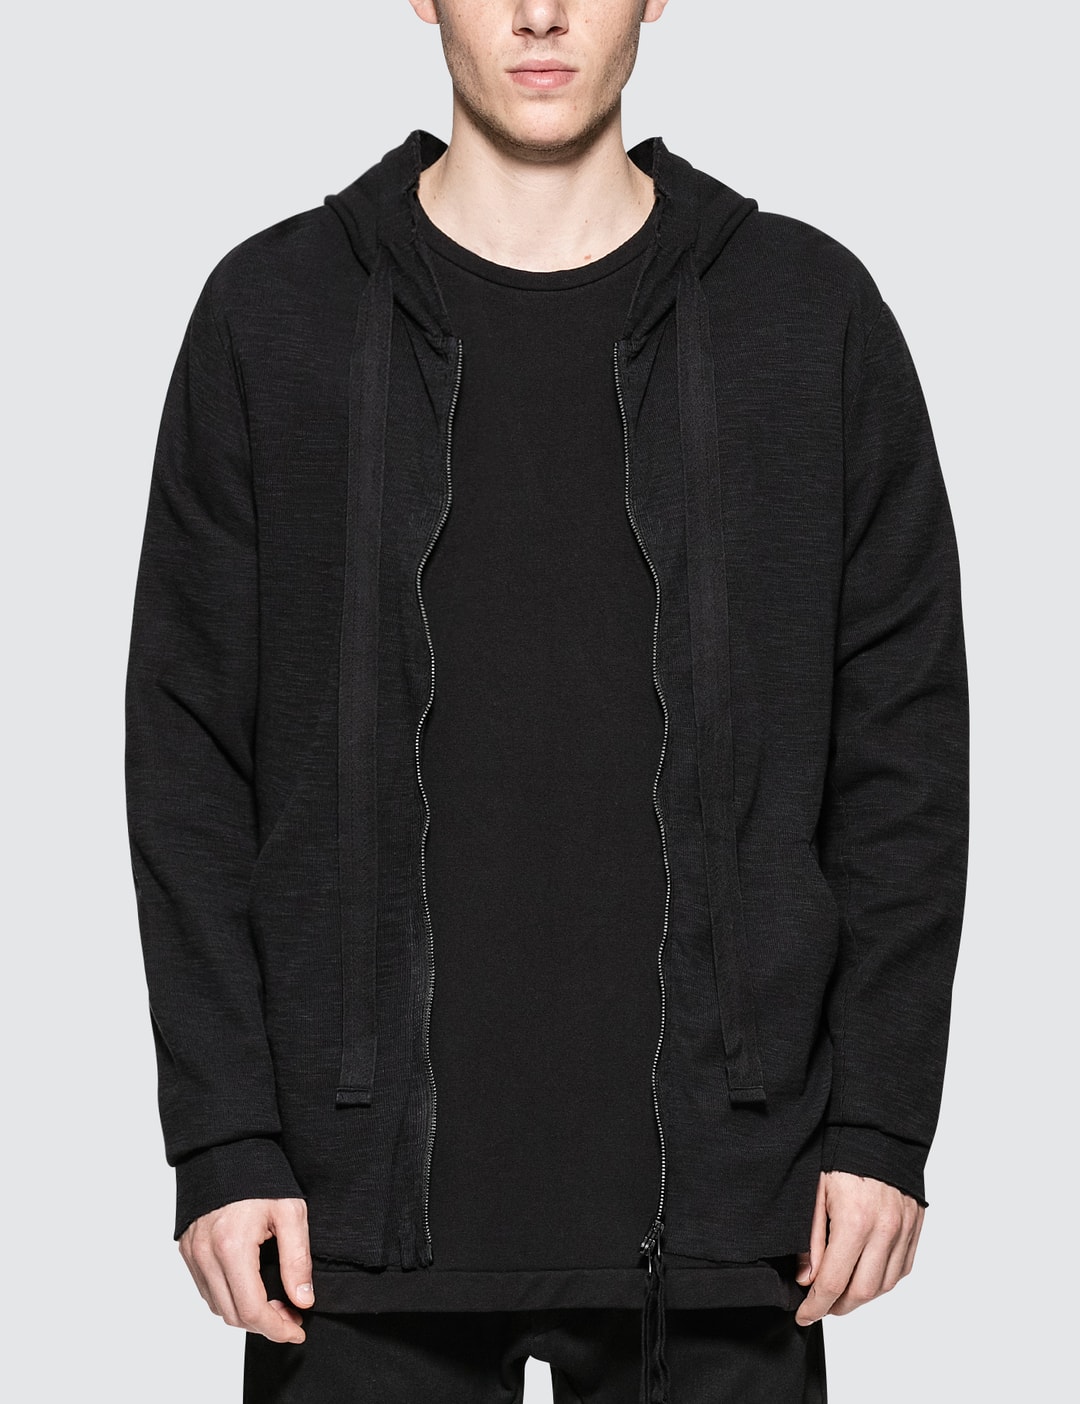 Thom/krom - Hooded T-Shirt Jacket | HBX - Globally Curated Fashion and ...